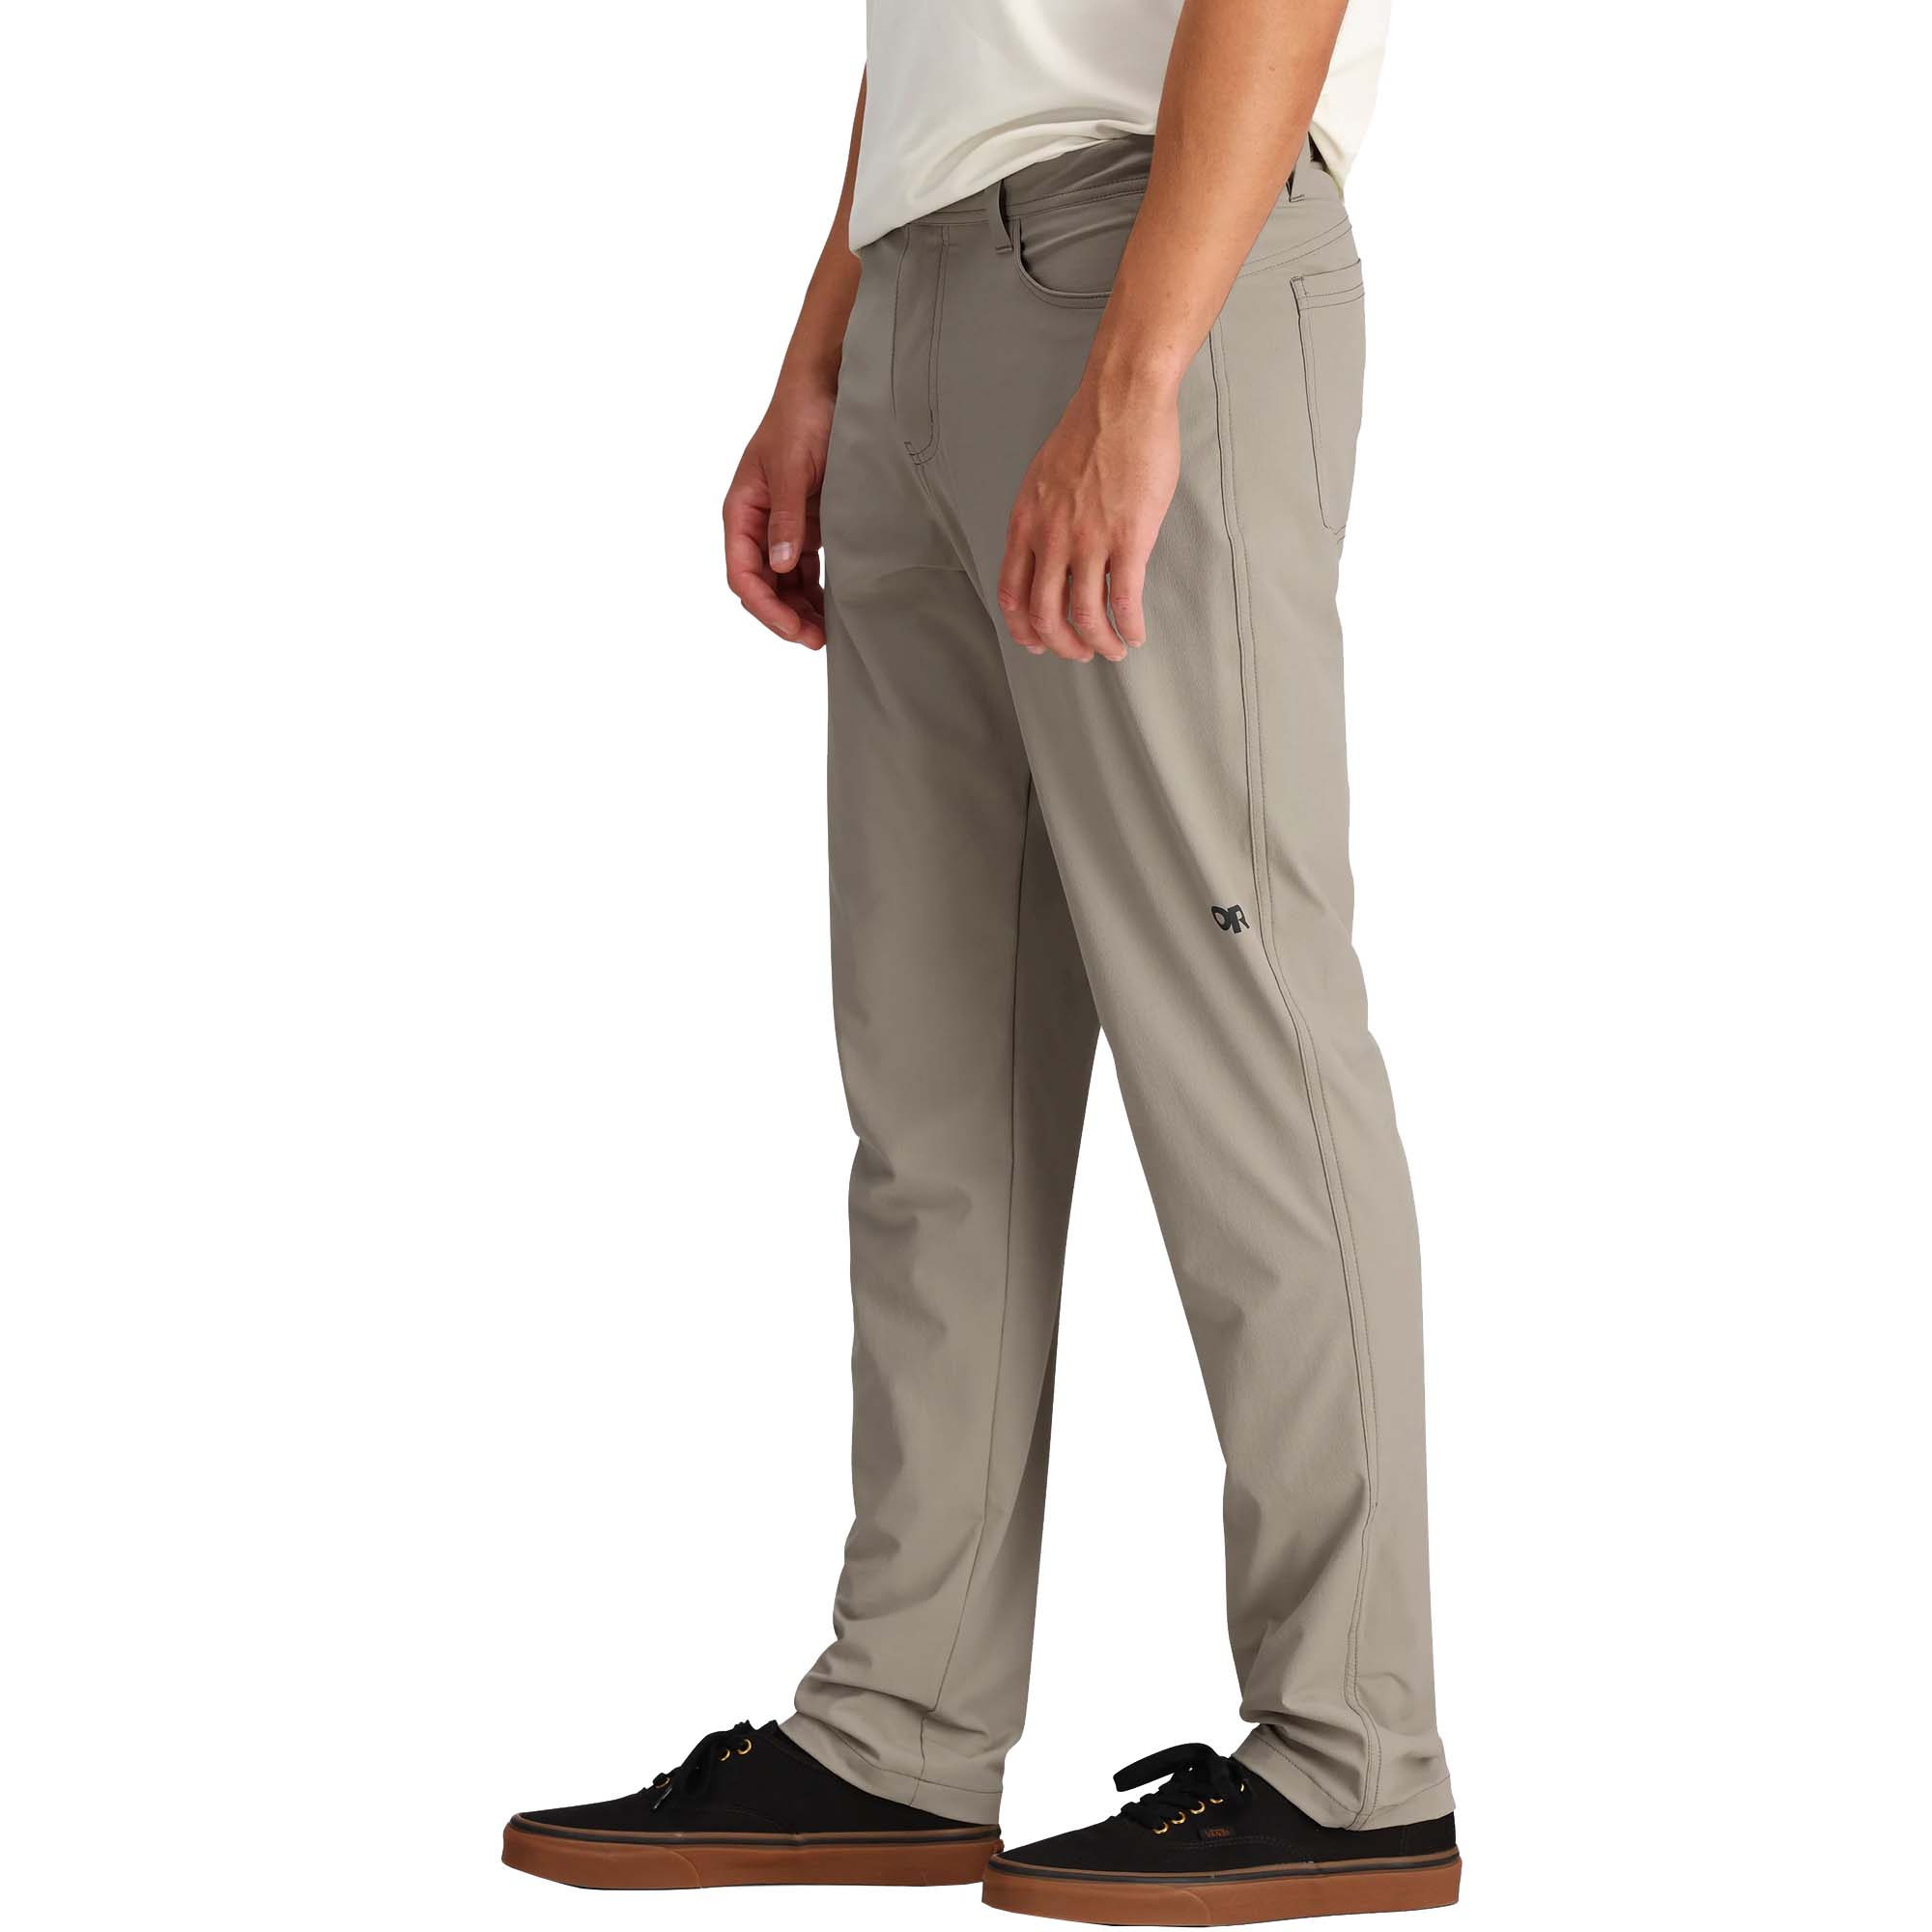 Outdoor Research Ferrosi Transit Technical Pants